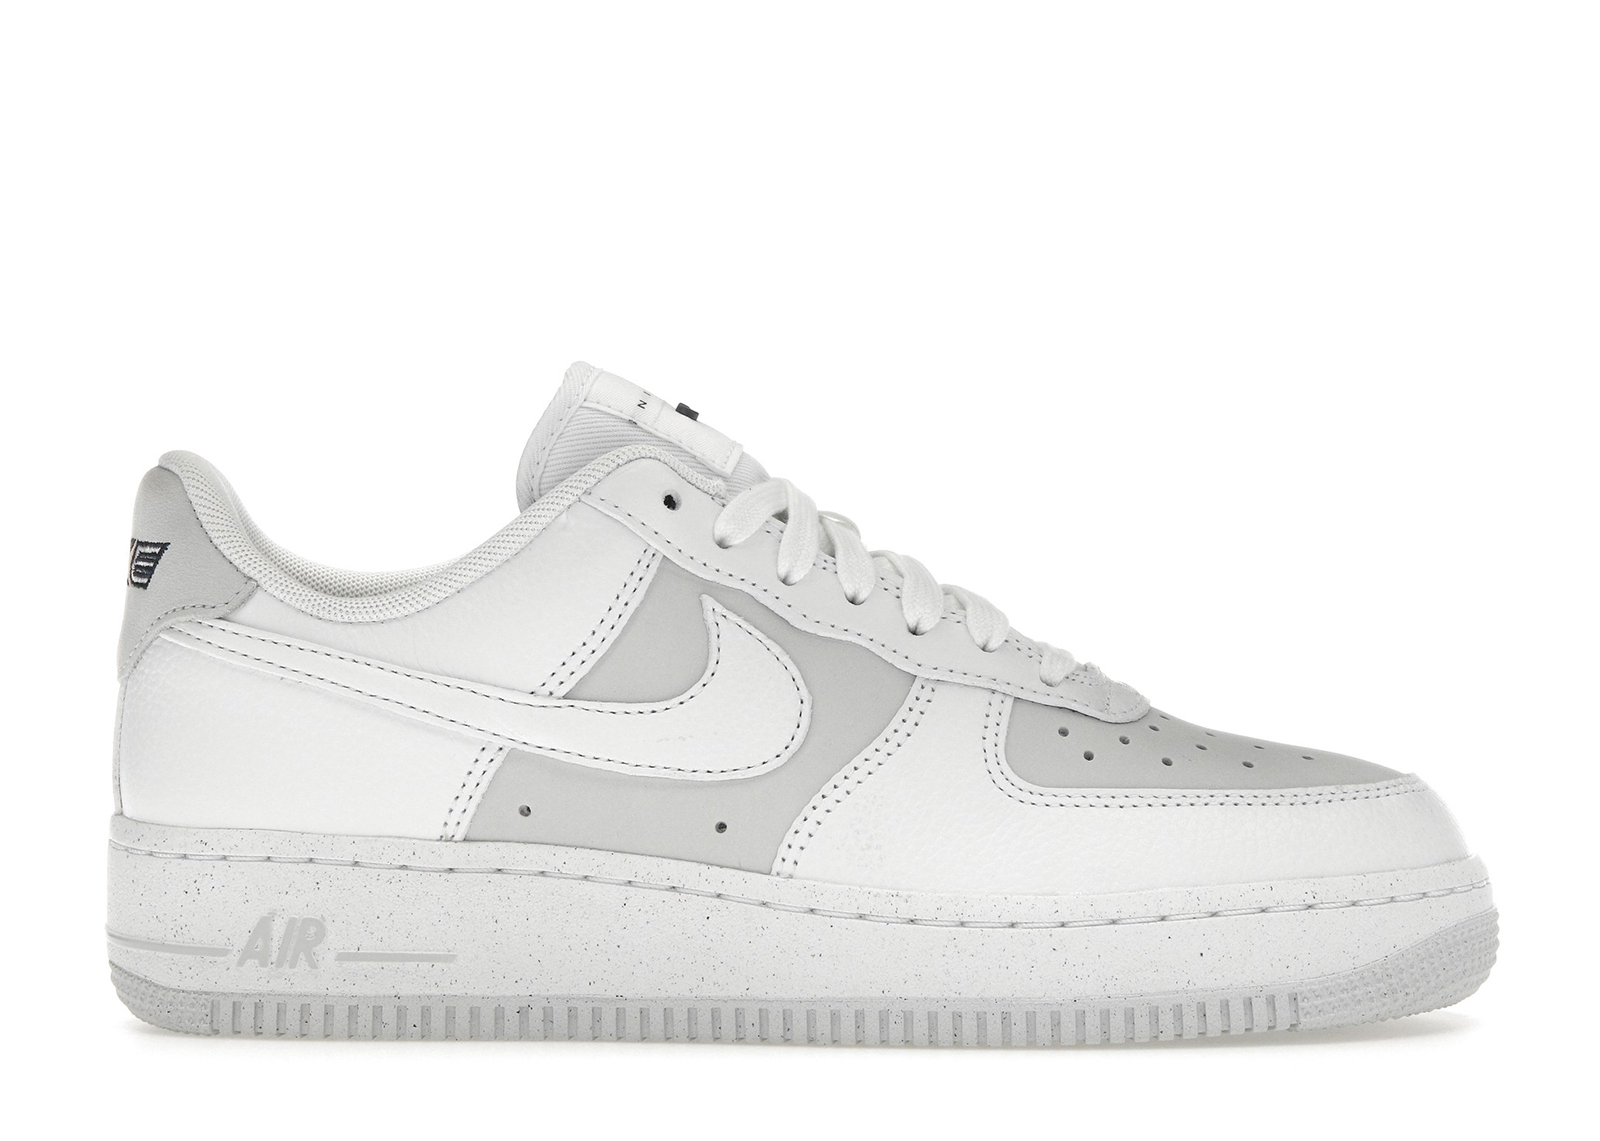 Nike Air Force 1 Low '07 LX White Photon Dust Women's)